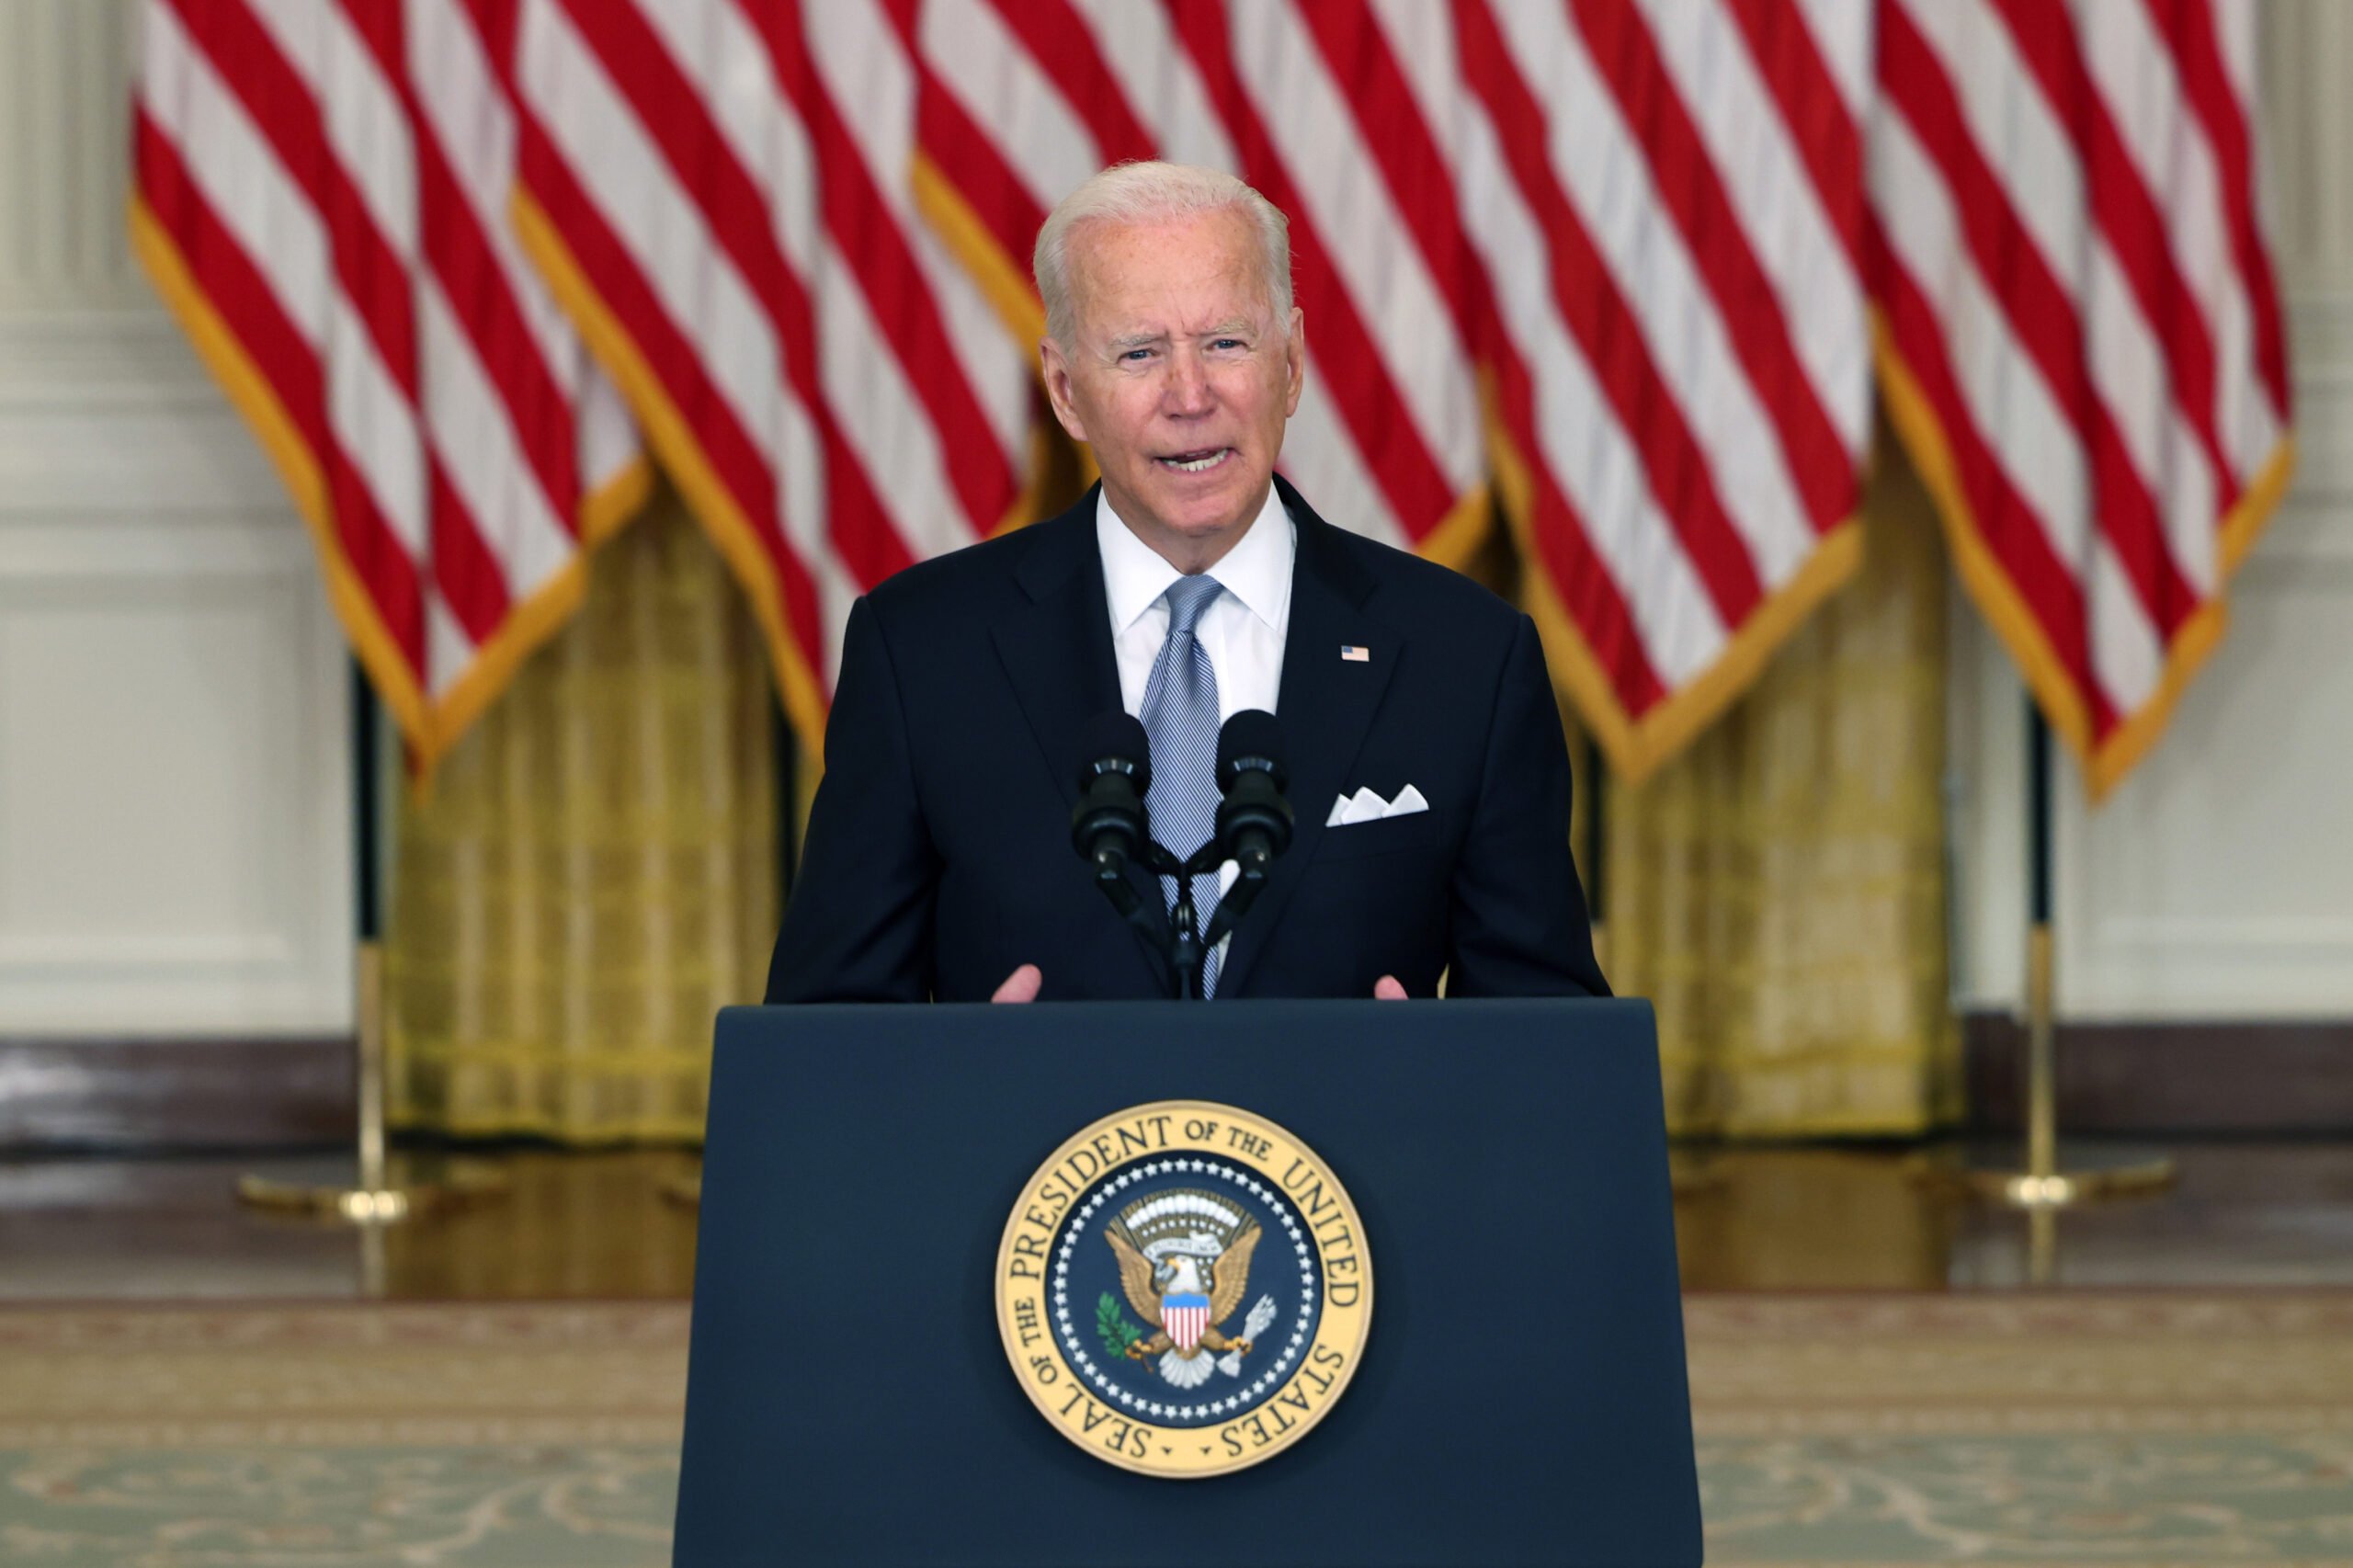 Biden vows U.S. forces will hunt down perpetrators of attacks near Kabul airport which killed dozens 1